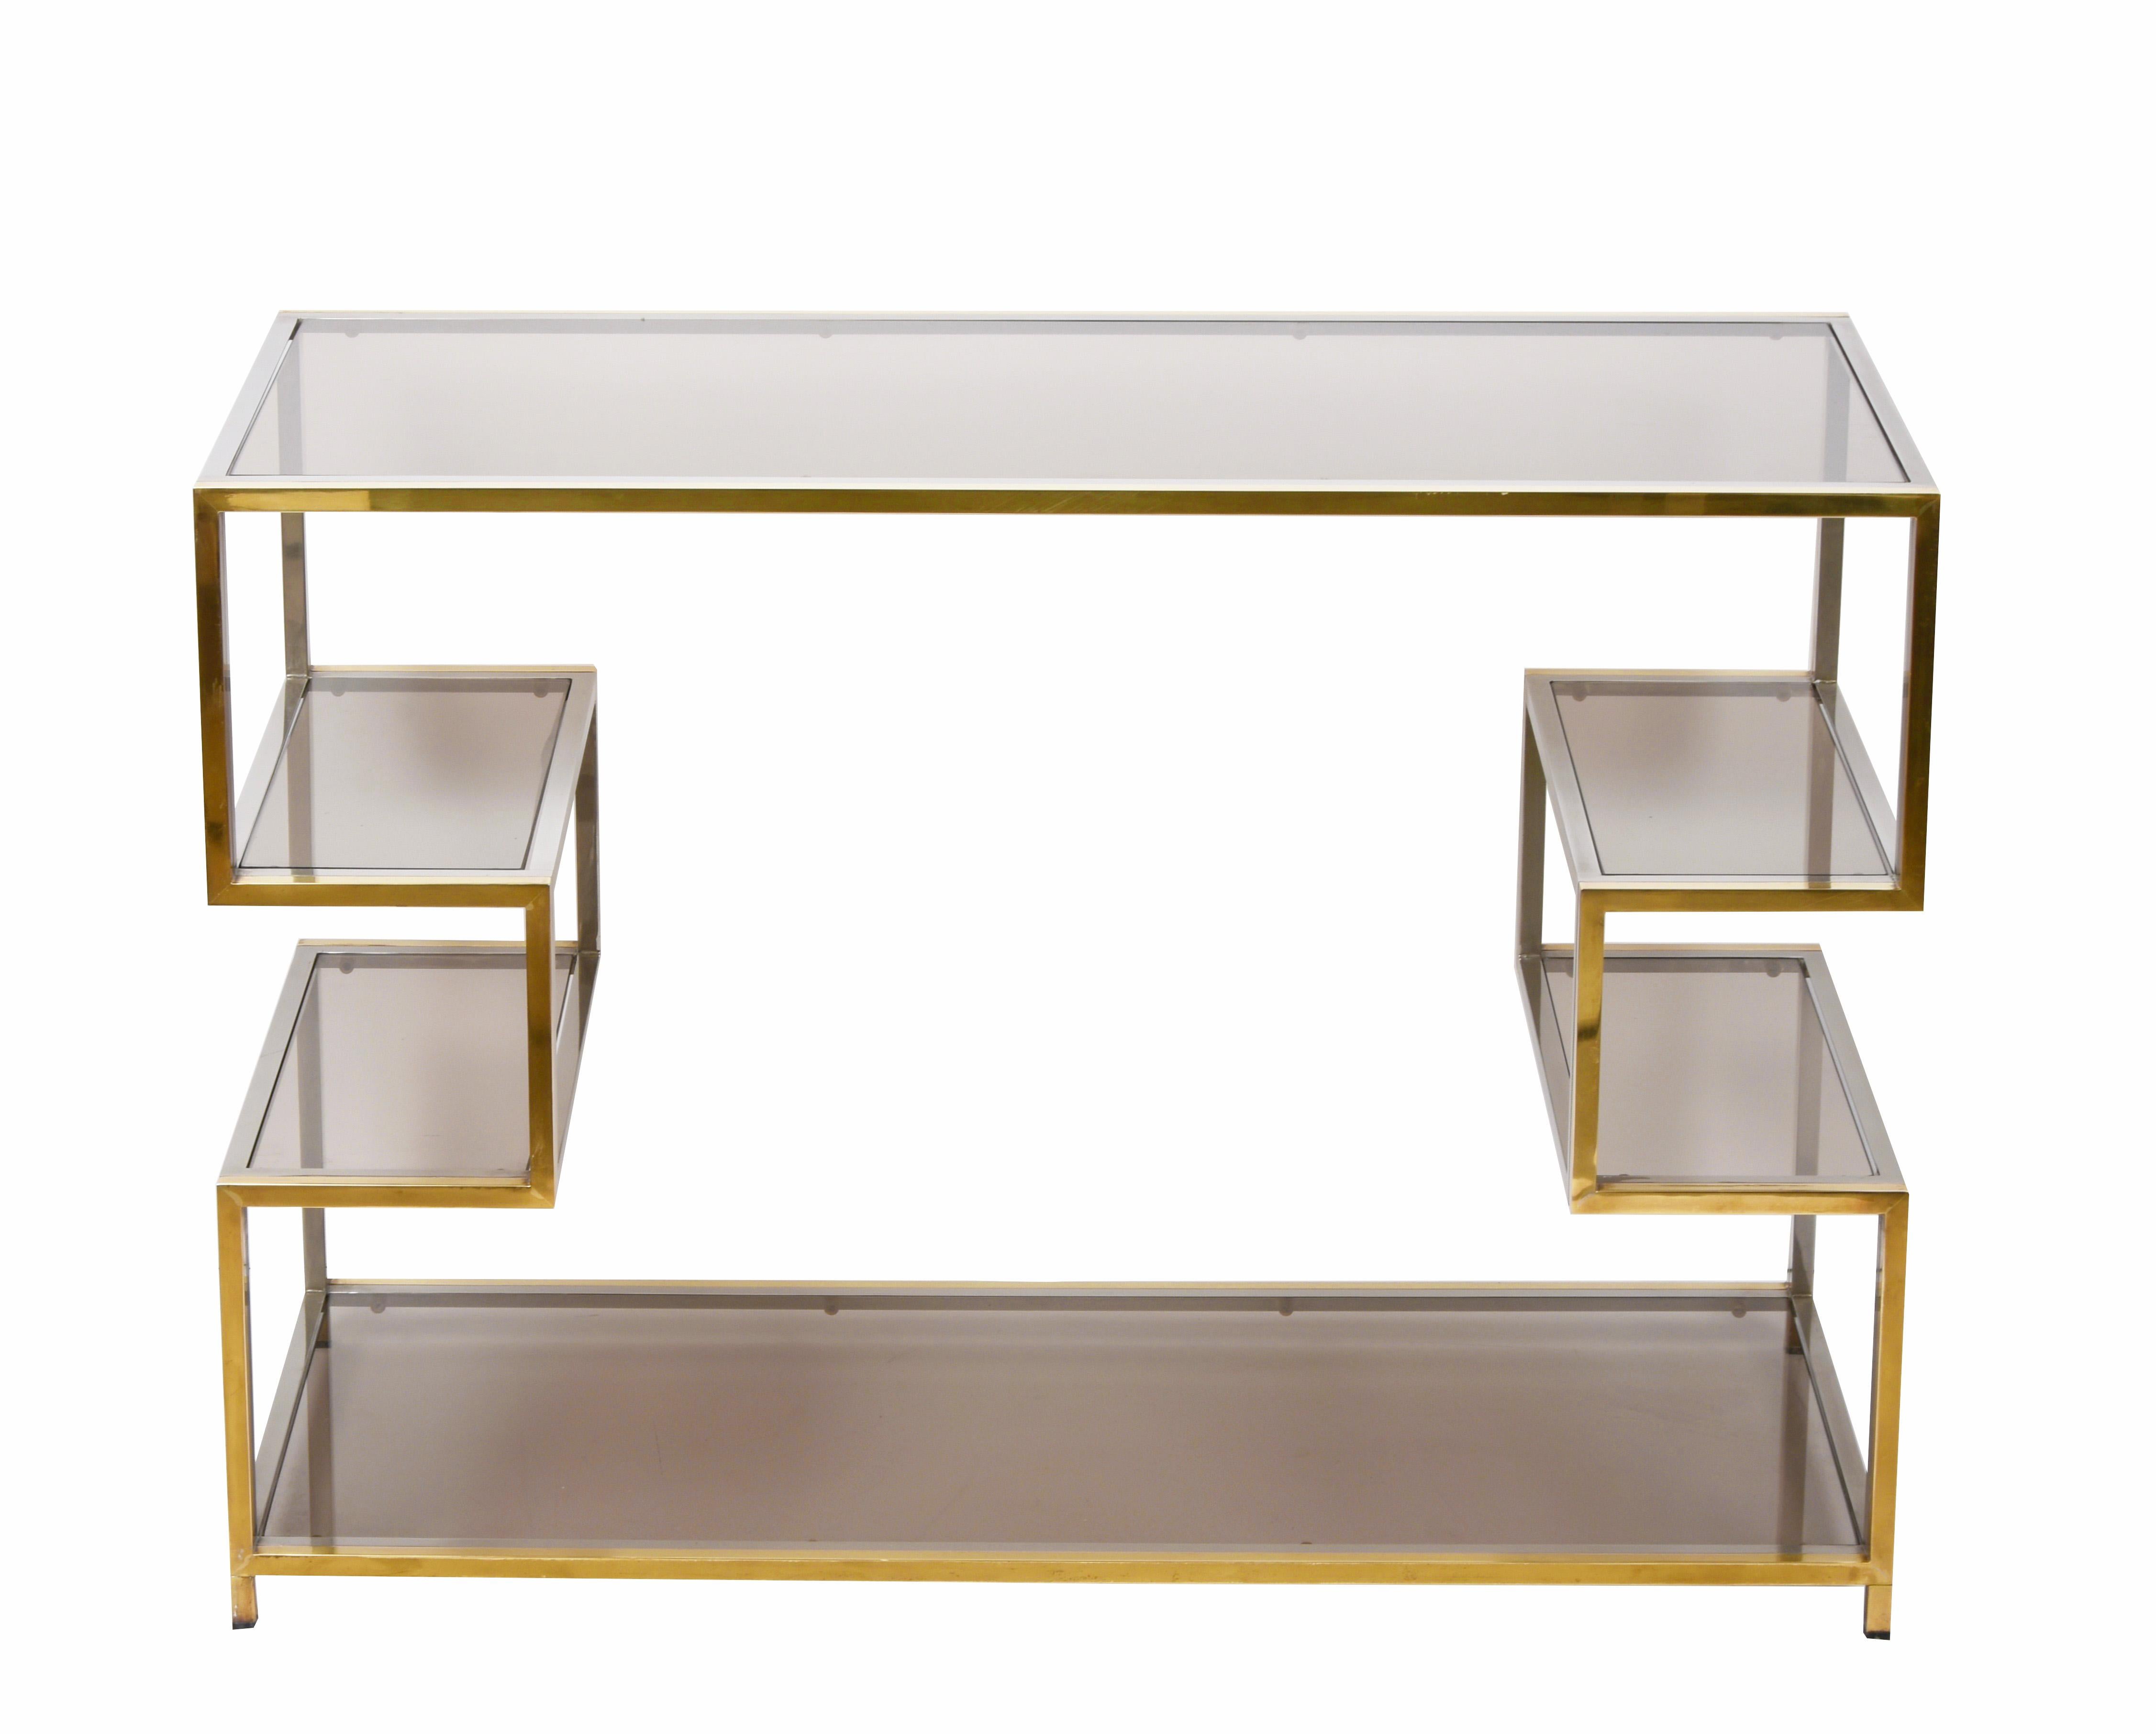 Amazing mid-century gold brass and glass console table. This marvellous piece was designed in Italy during the 1970s.

This fantastic piece is in golden brass, chromed metal and smoked glasses, with straight lines on the top and bottom shelves and